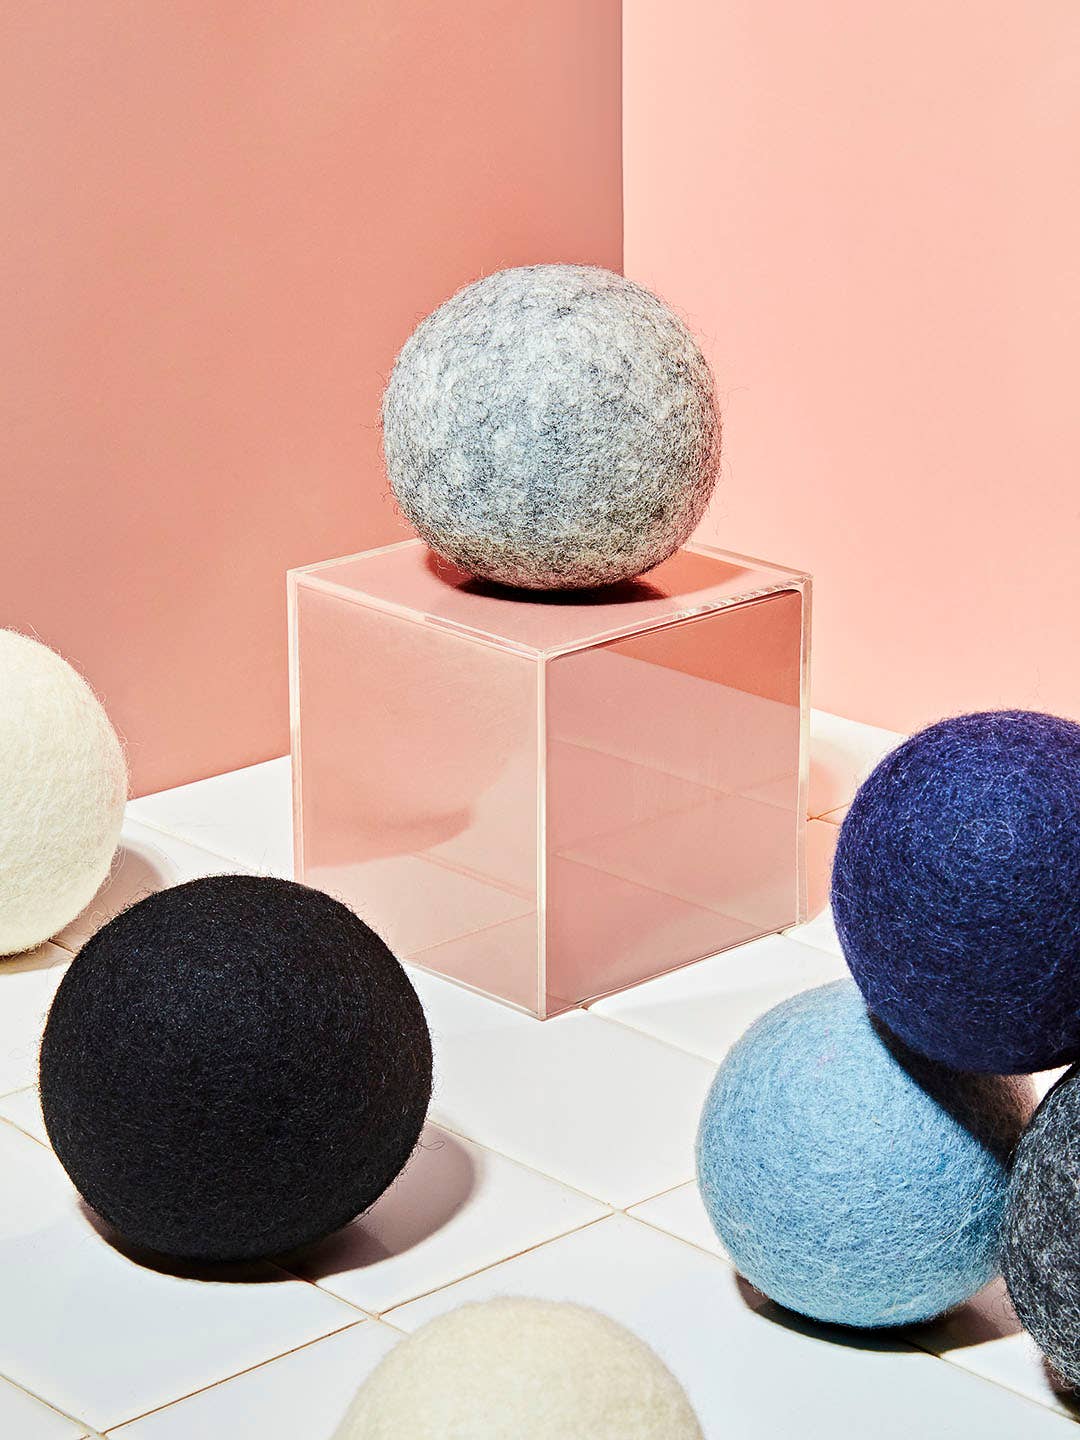 Colorful, wool dryer balls amid pink background